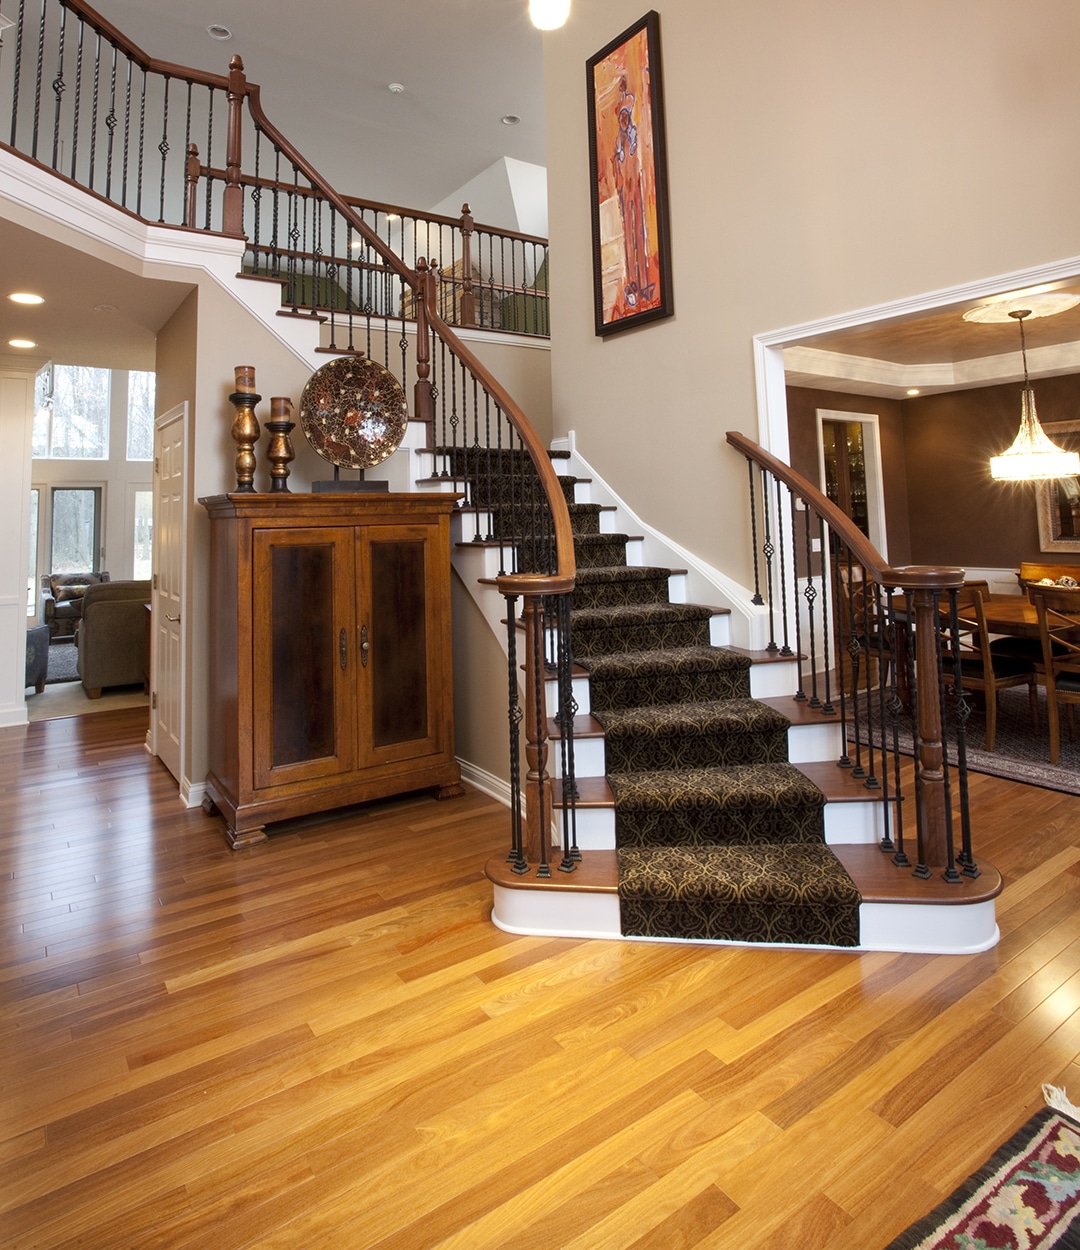 Two-story foyer features open staircase and wood floor